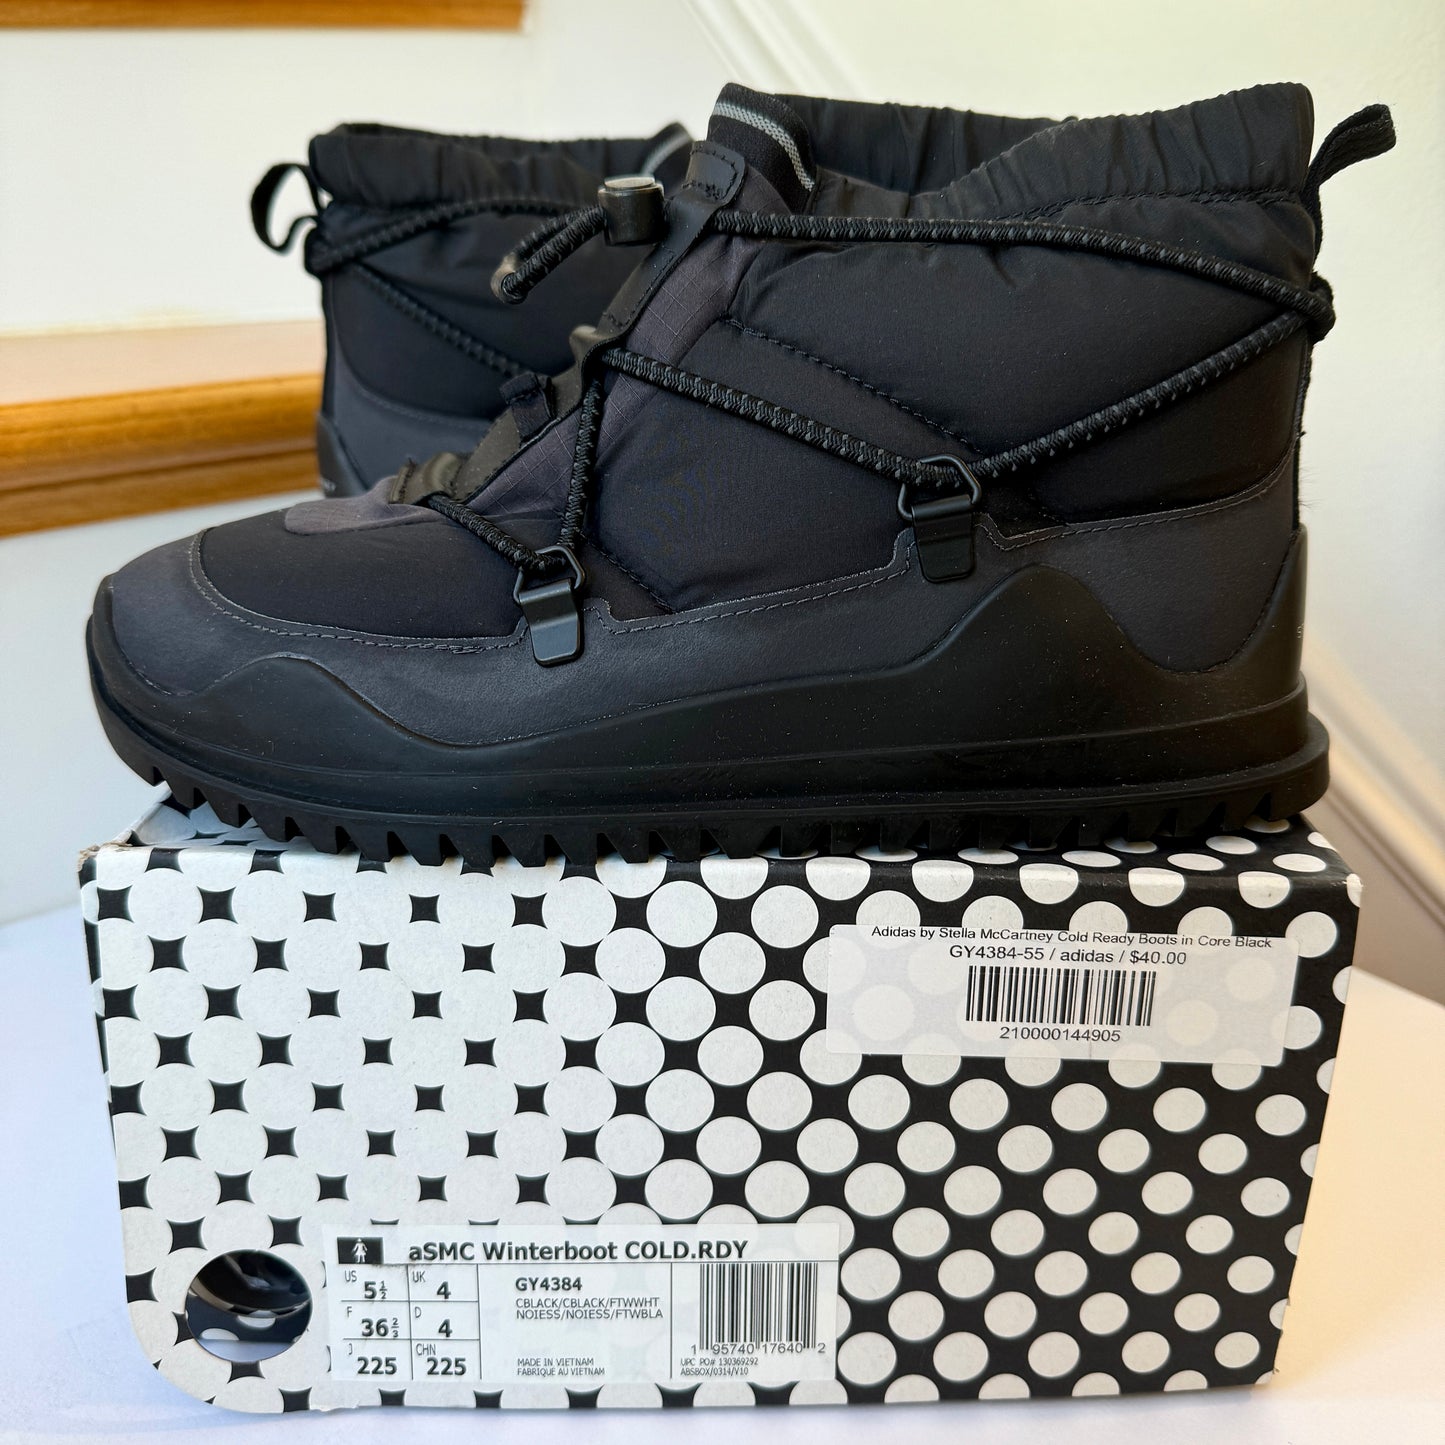 Adidas by Stella McCartney Winter boot Snow Shoes Cold.Rdy in black womens